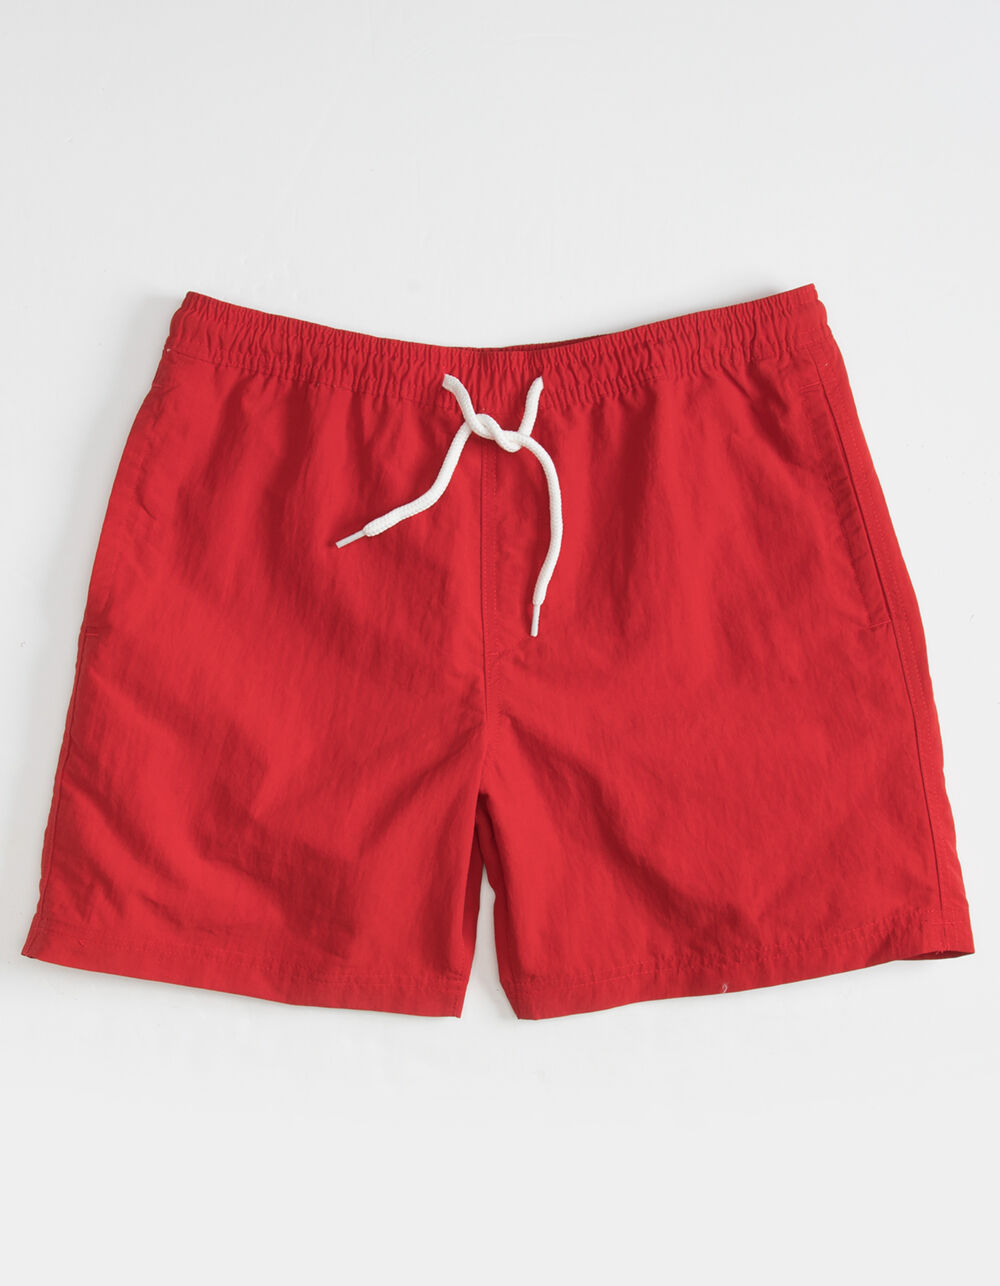 RSQ Nylon Mens Red Shorts - RED